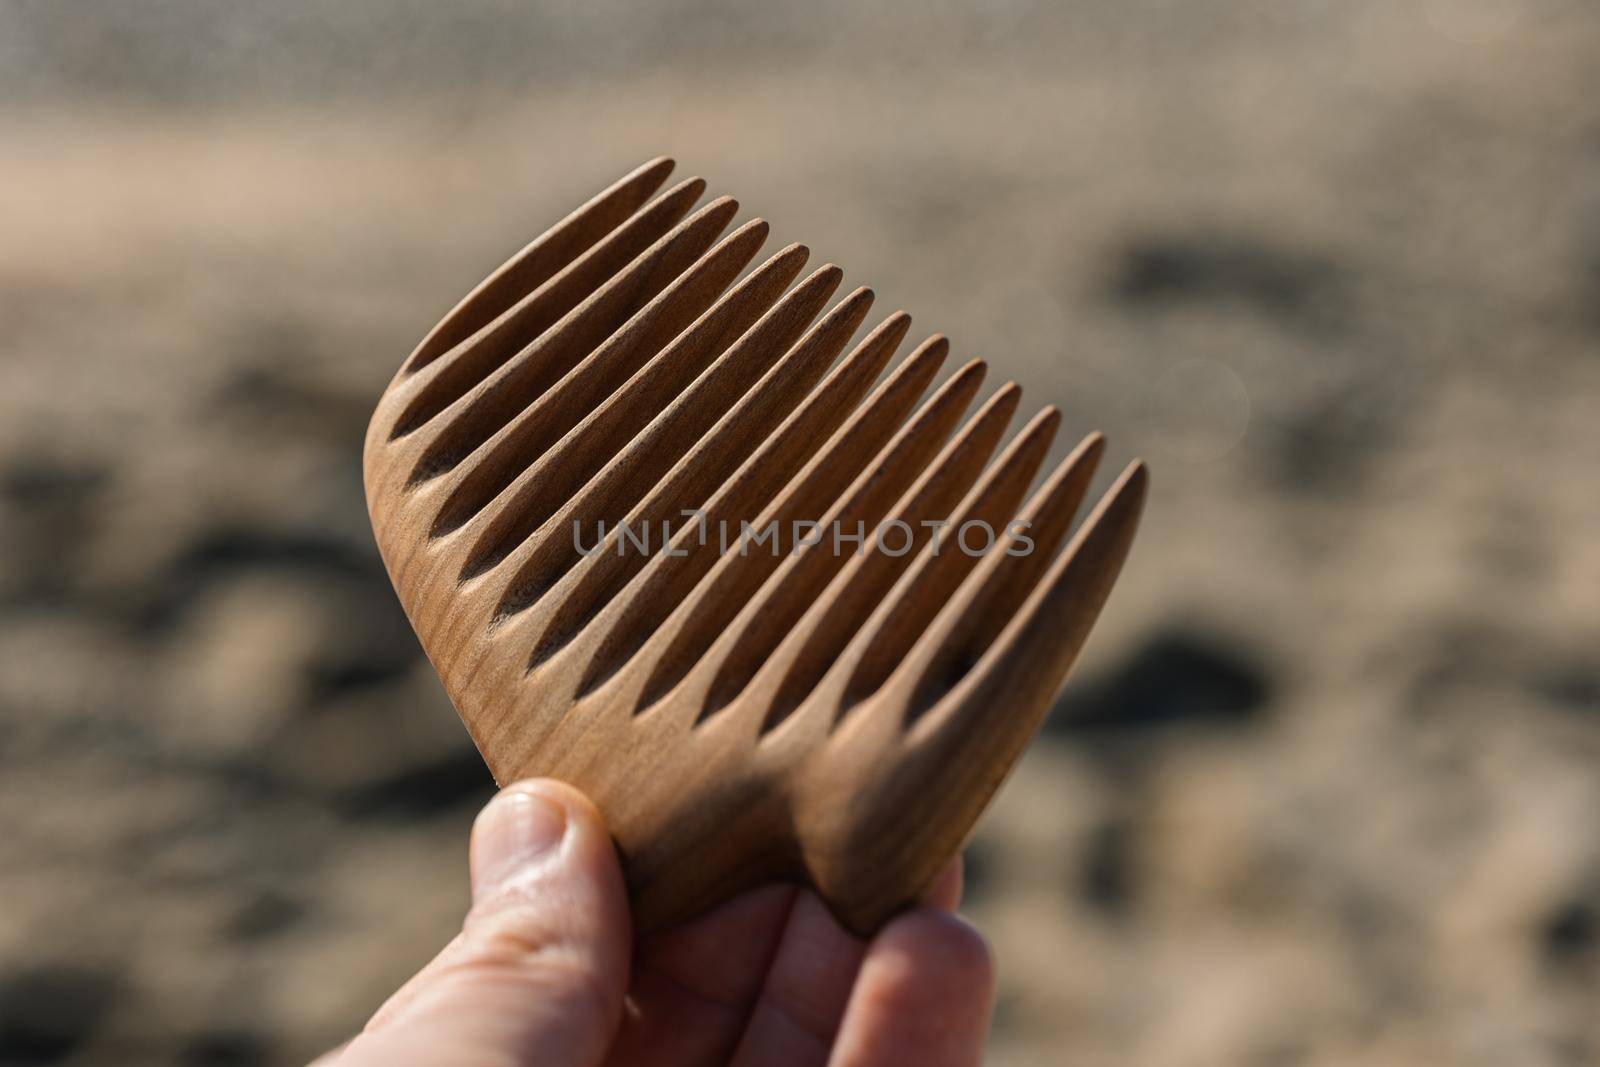 Handmade wooden comb for hair care in man hand by apavlin